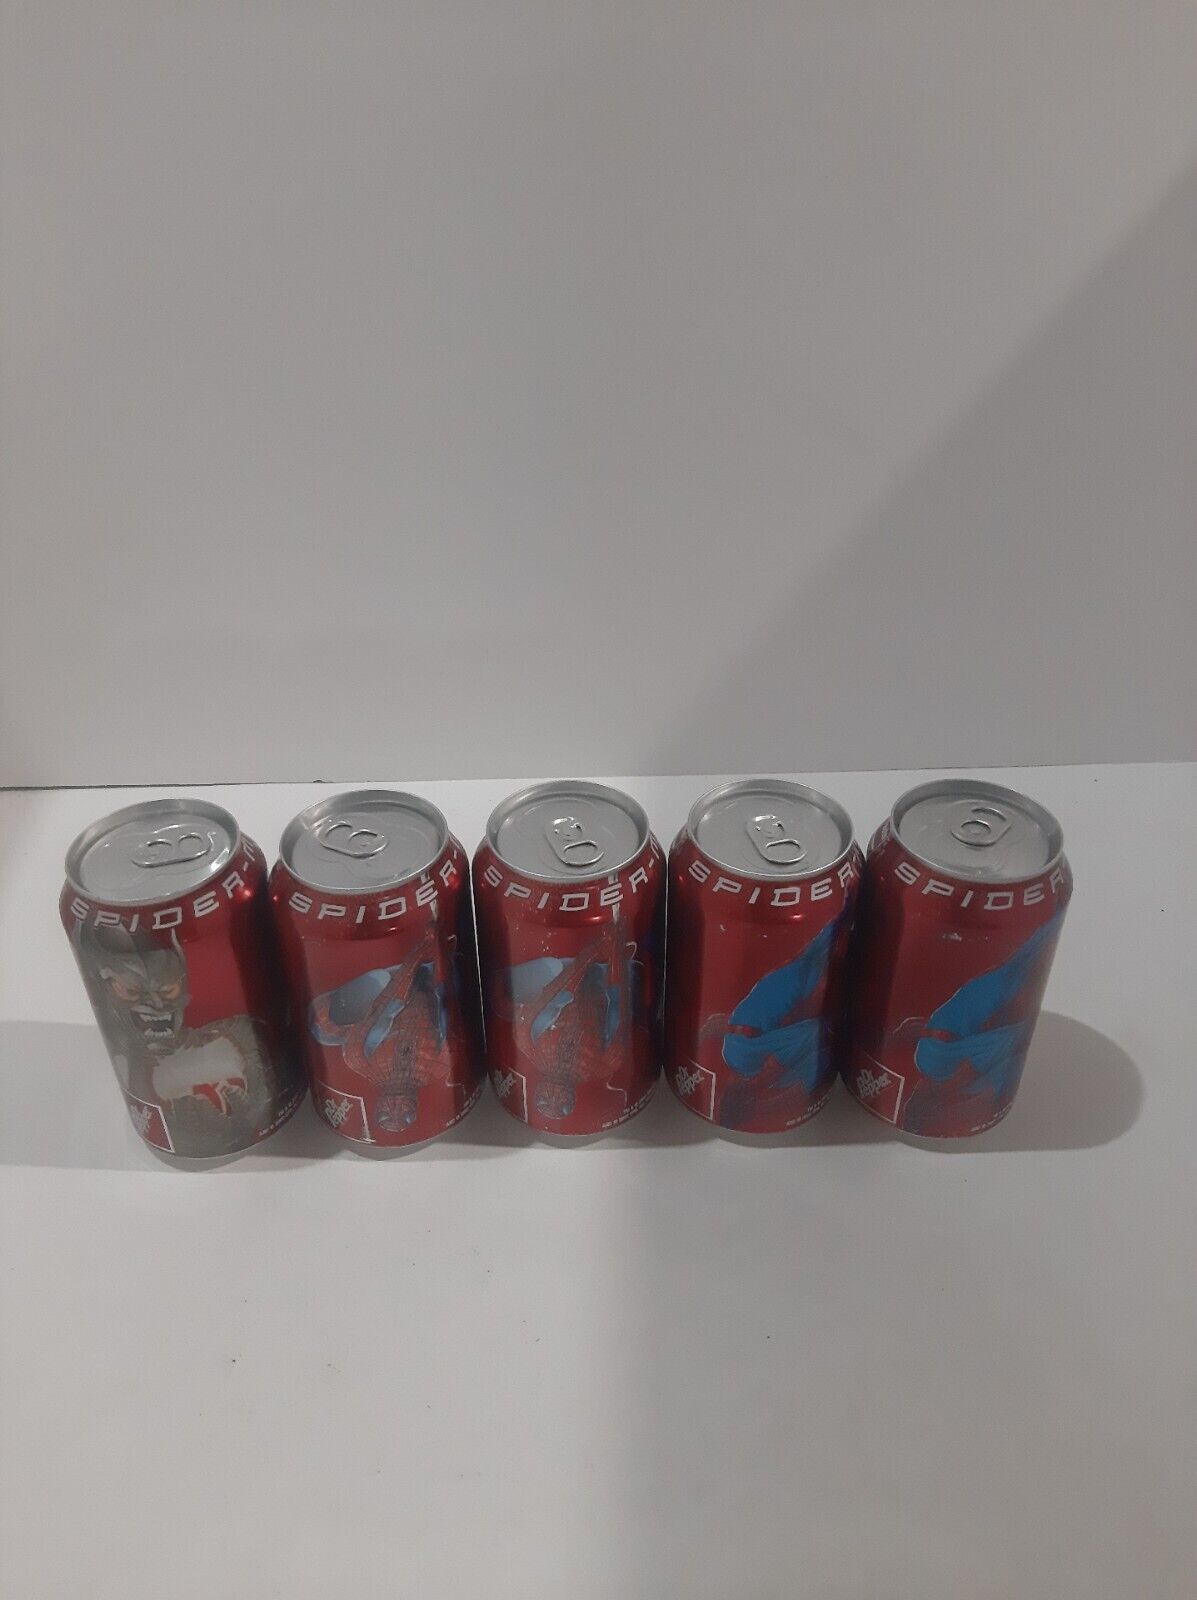 2002 Spiderman 12oz Promotional Dr Pepper Cans Lot Of 5 Unopened & Empty